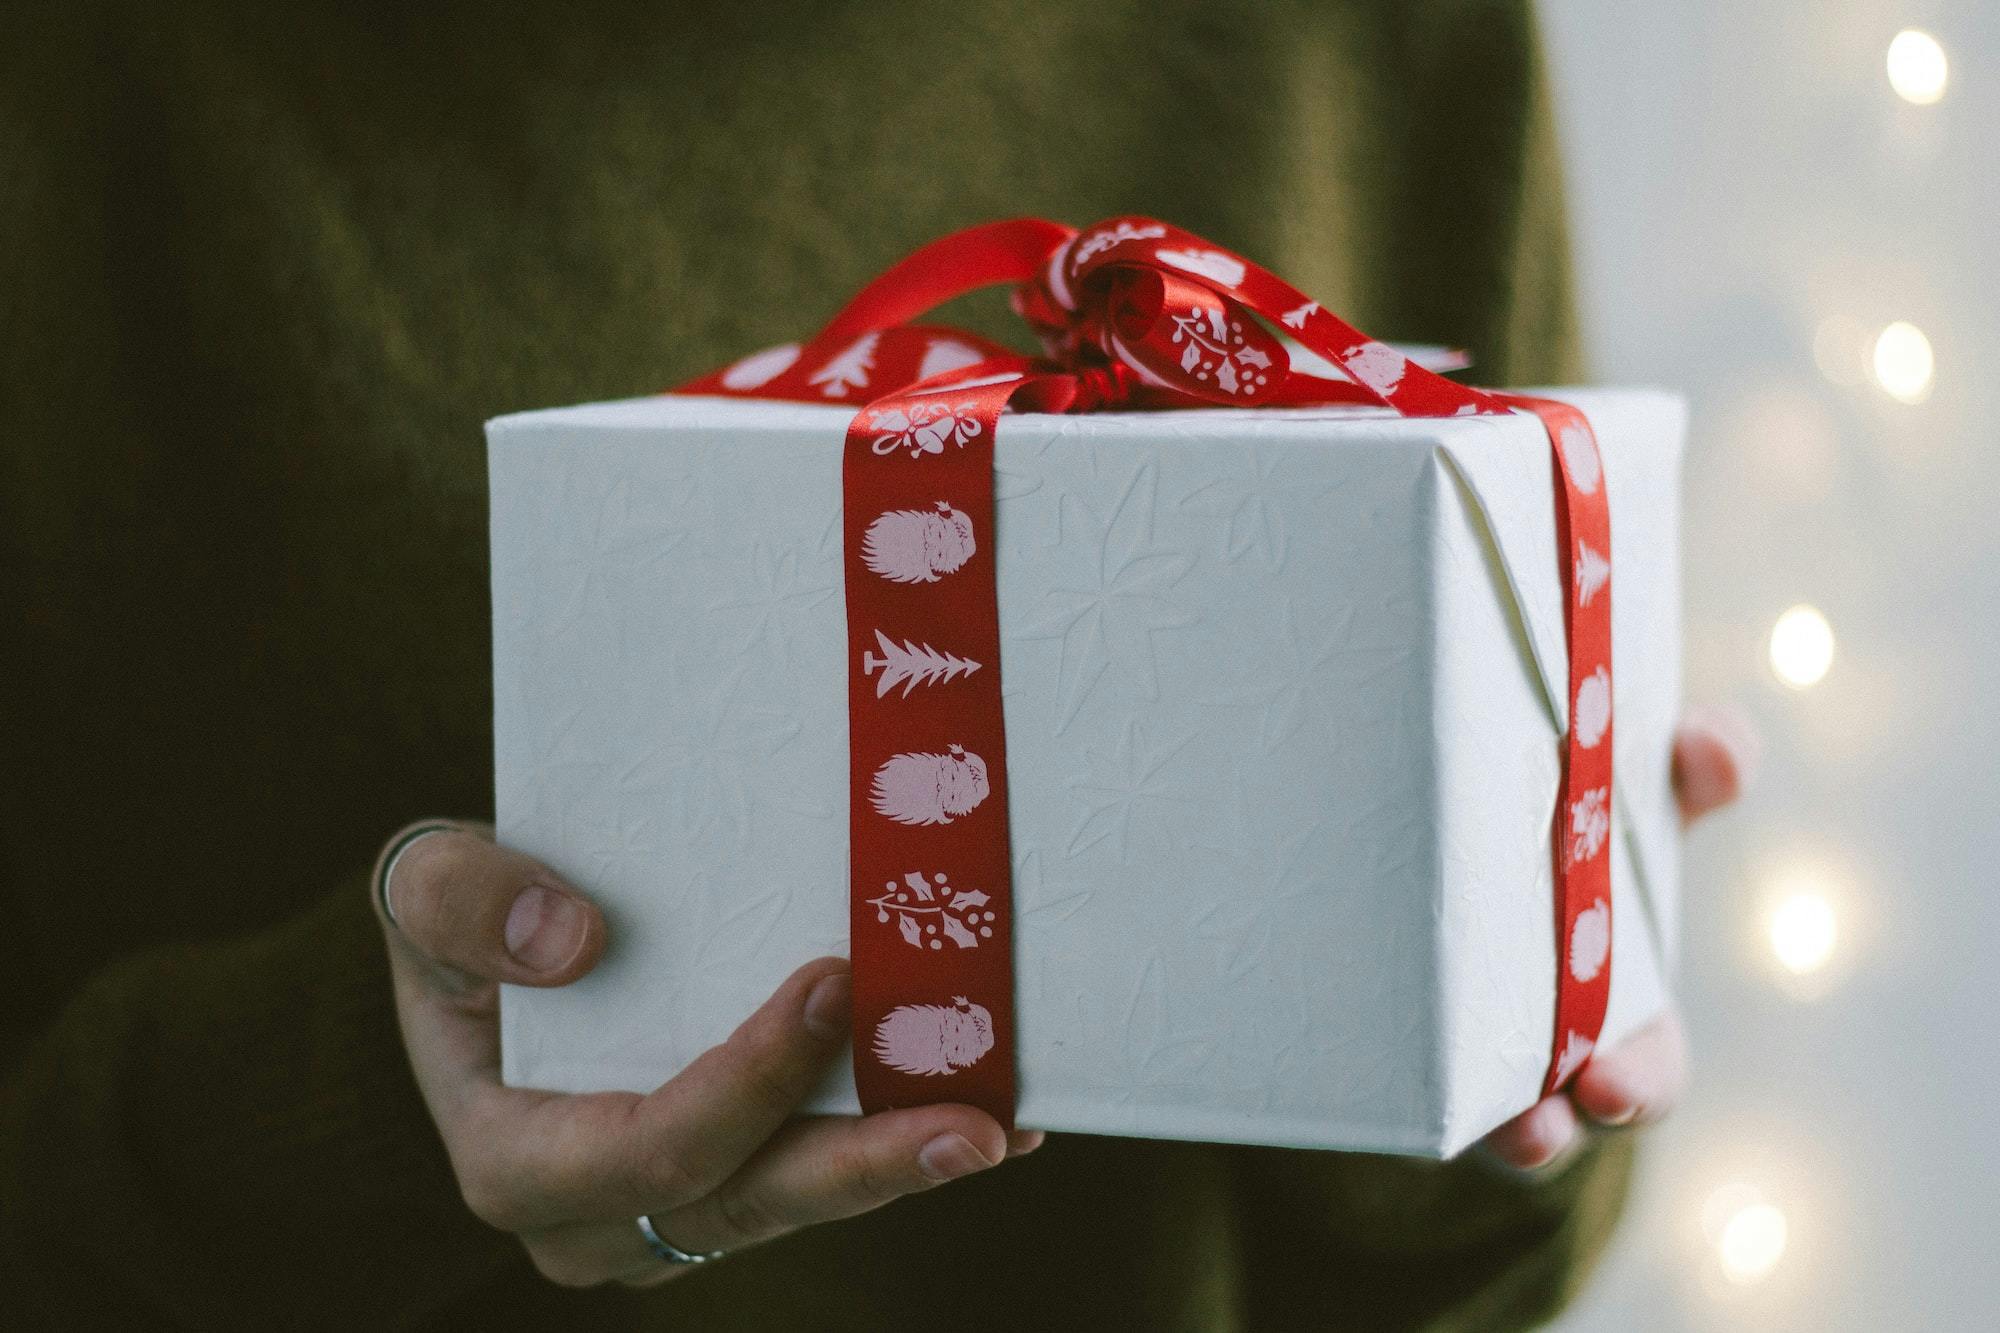 10 thoughtful last-minute Christmas gift ideas (that are simple, cheap or free)